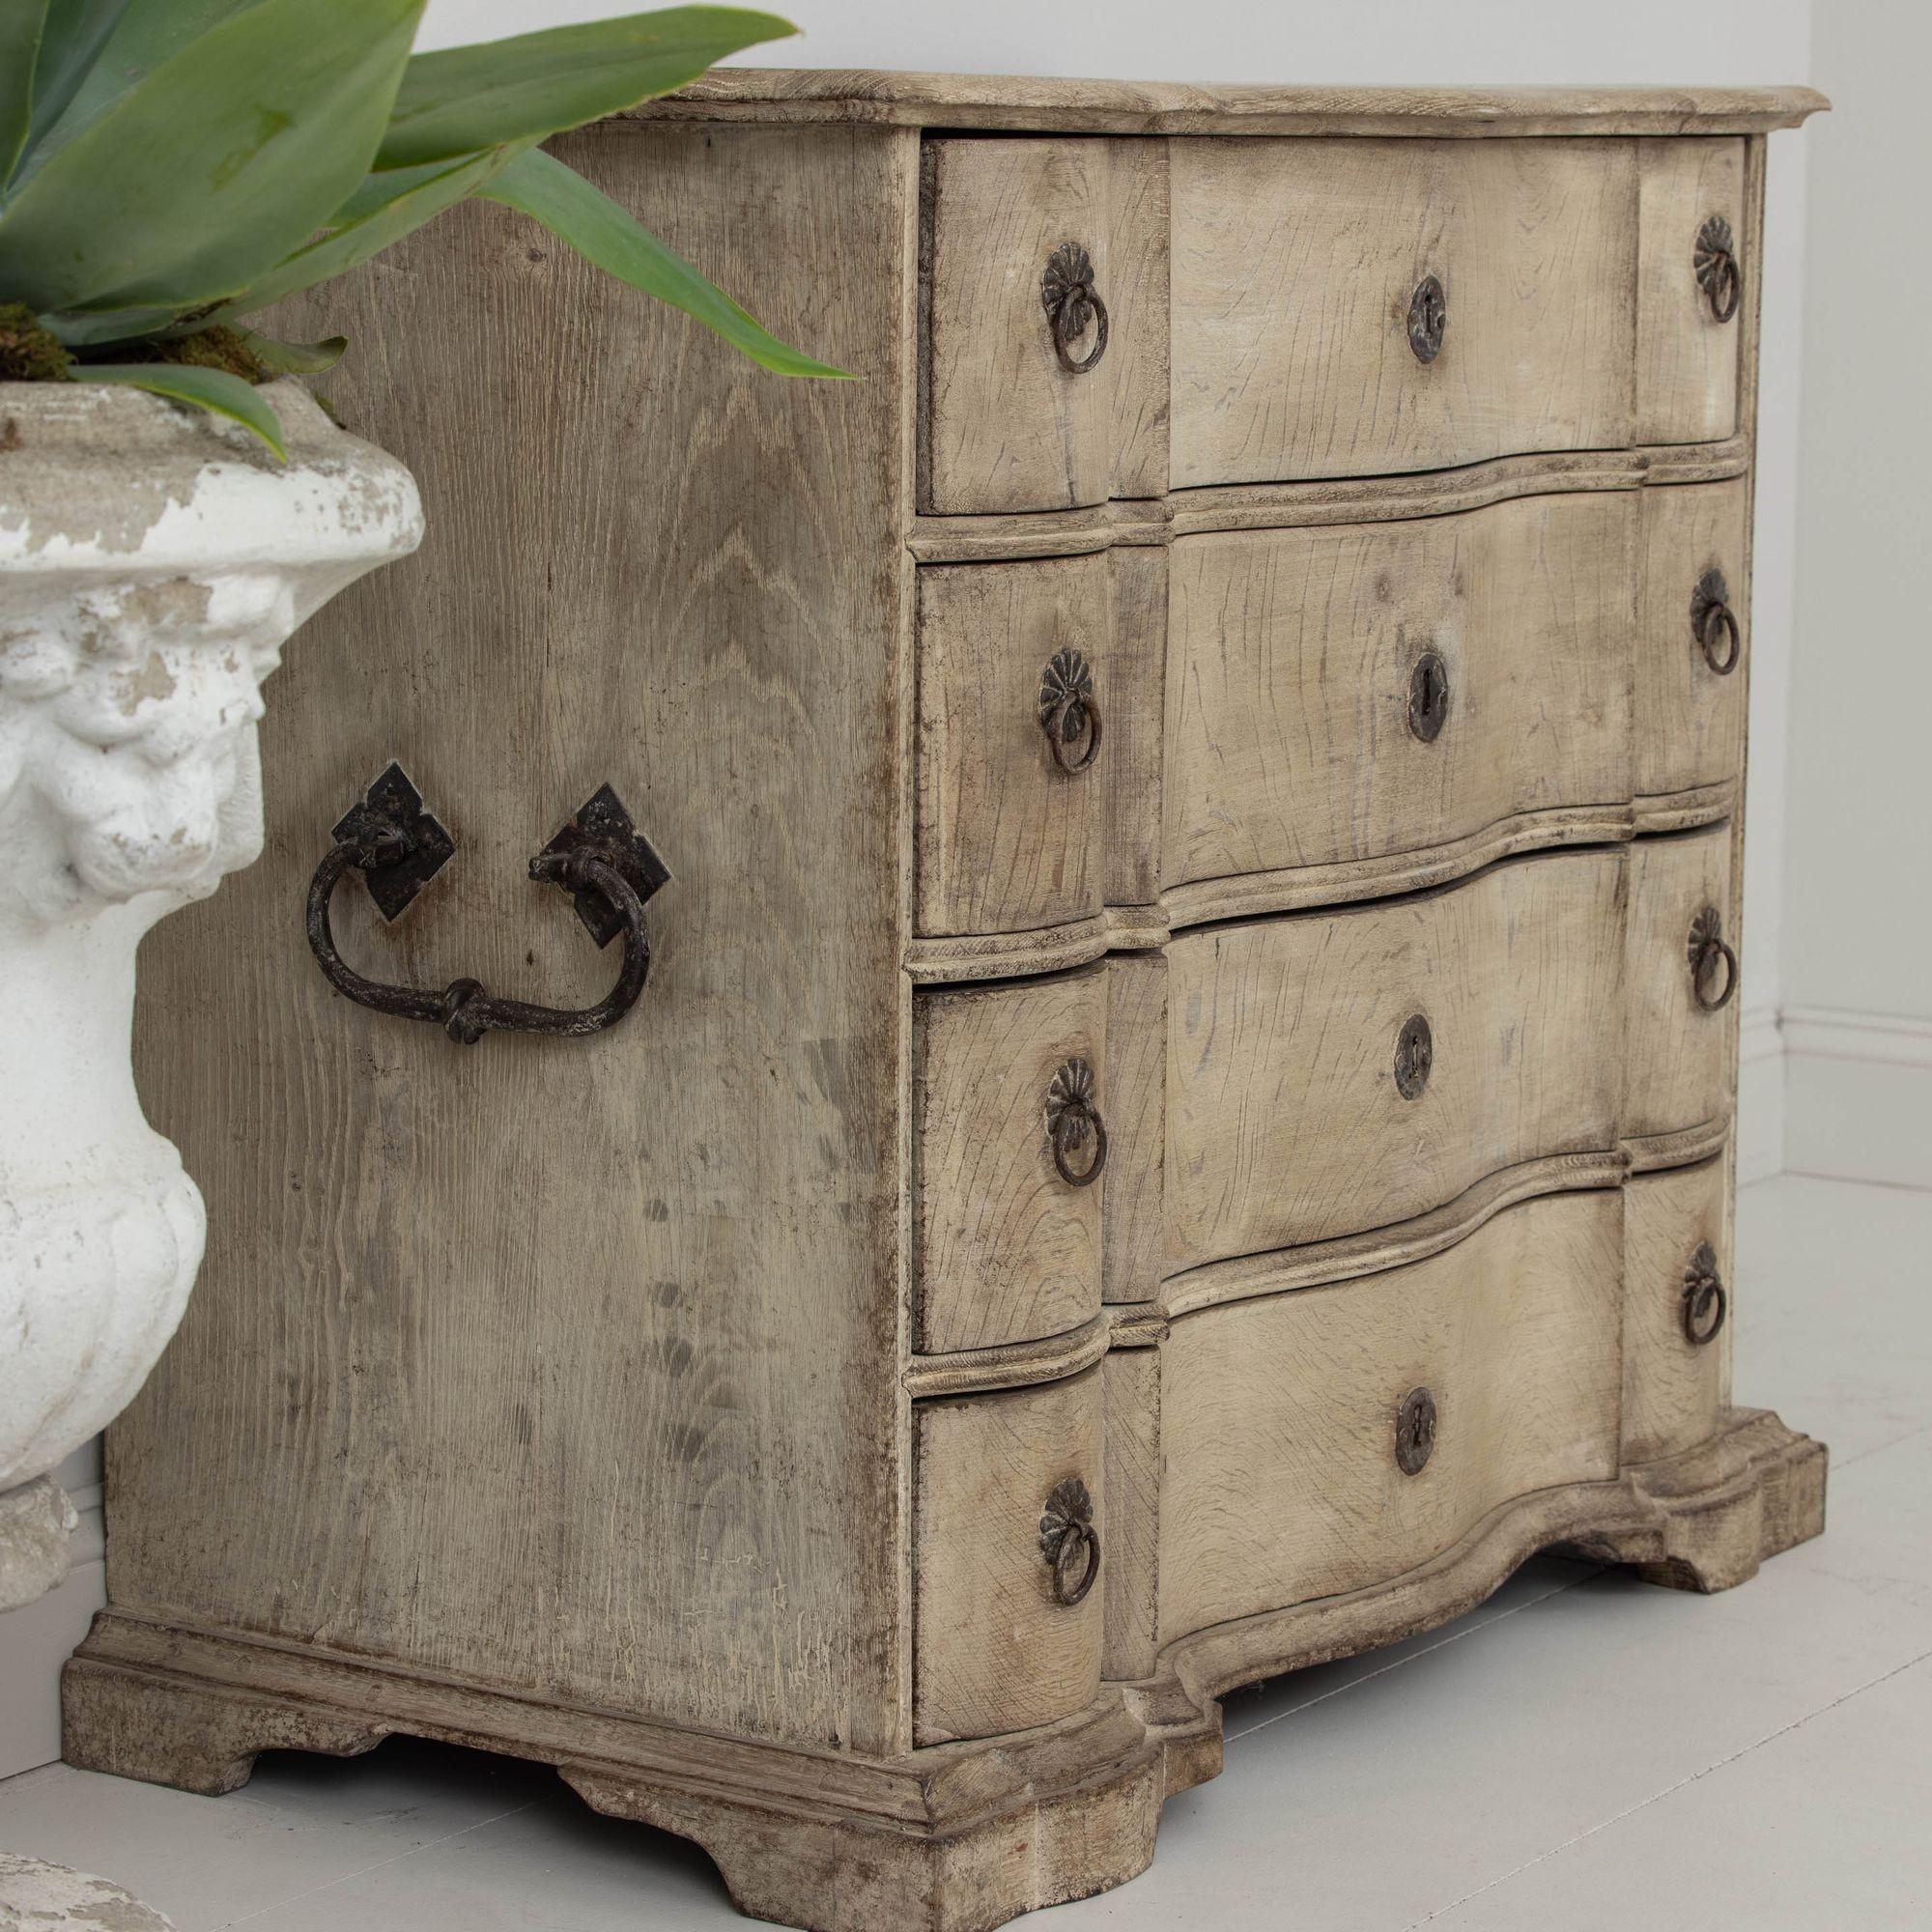 Hand-Carved 18th c. Danish Oak Commode in Original Patina with Arbalette Shaped Front For Sale